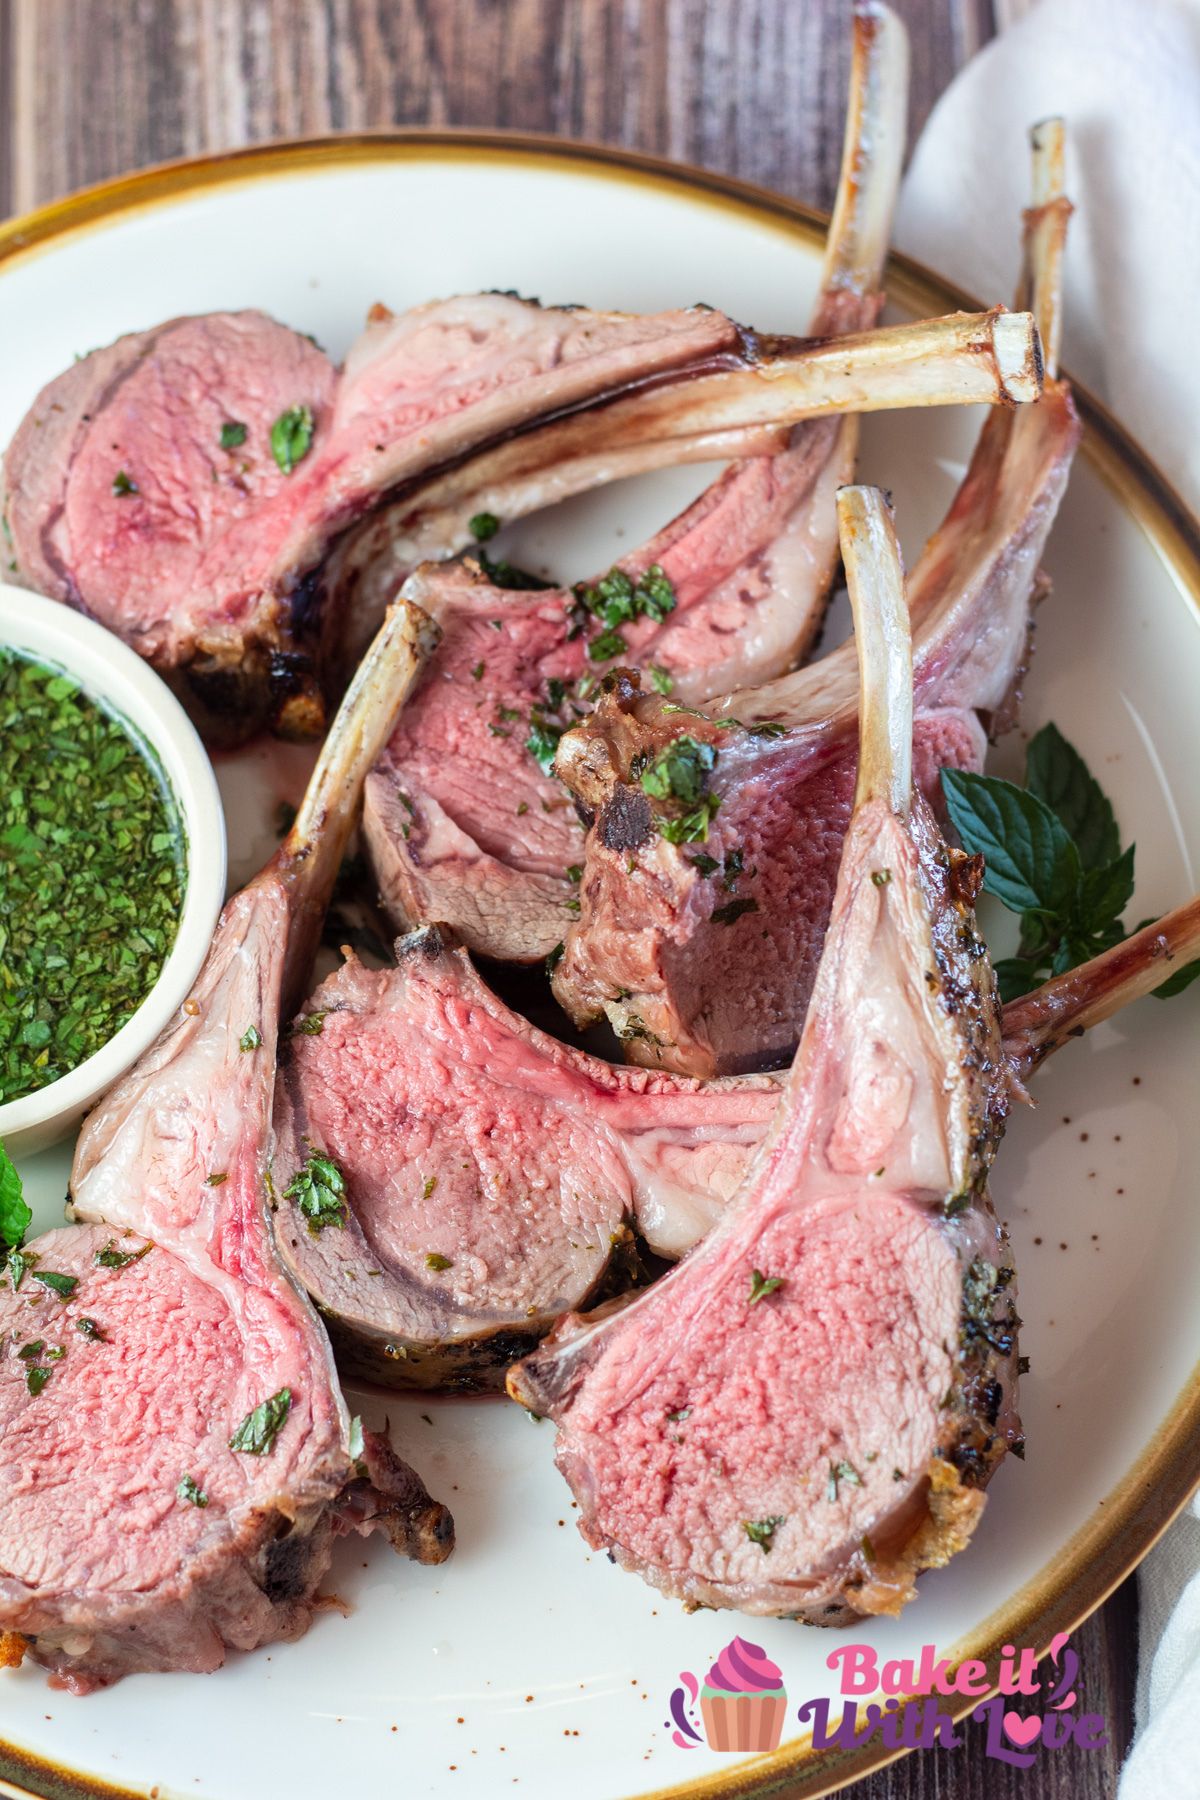 Tall image of lamb chops from the rack of lamb, on a plate with mint sauce.